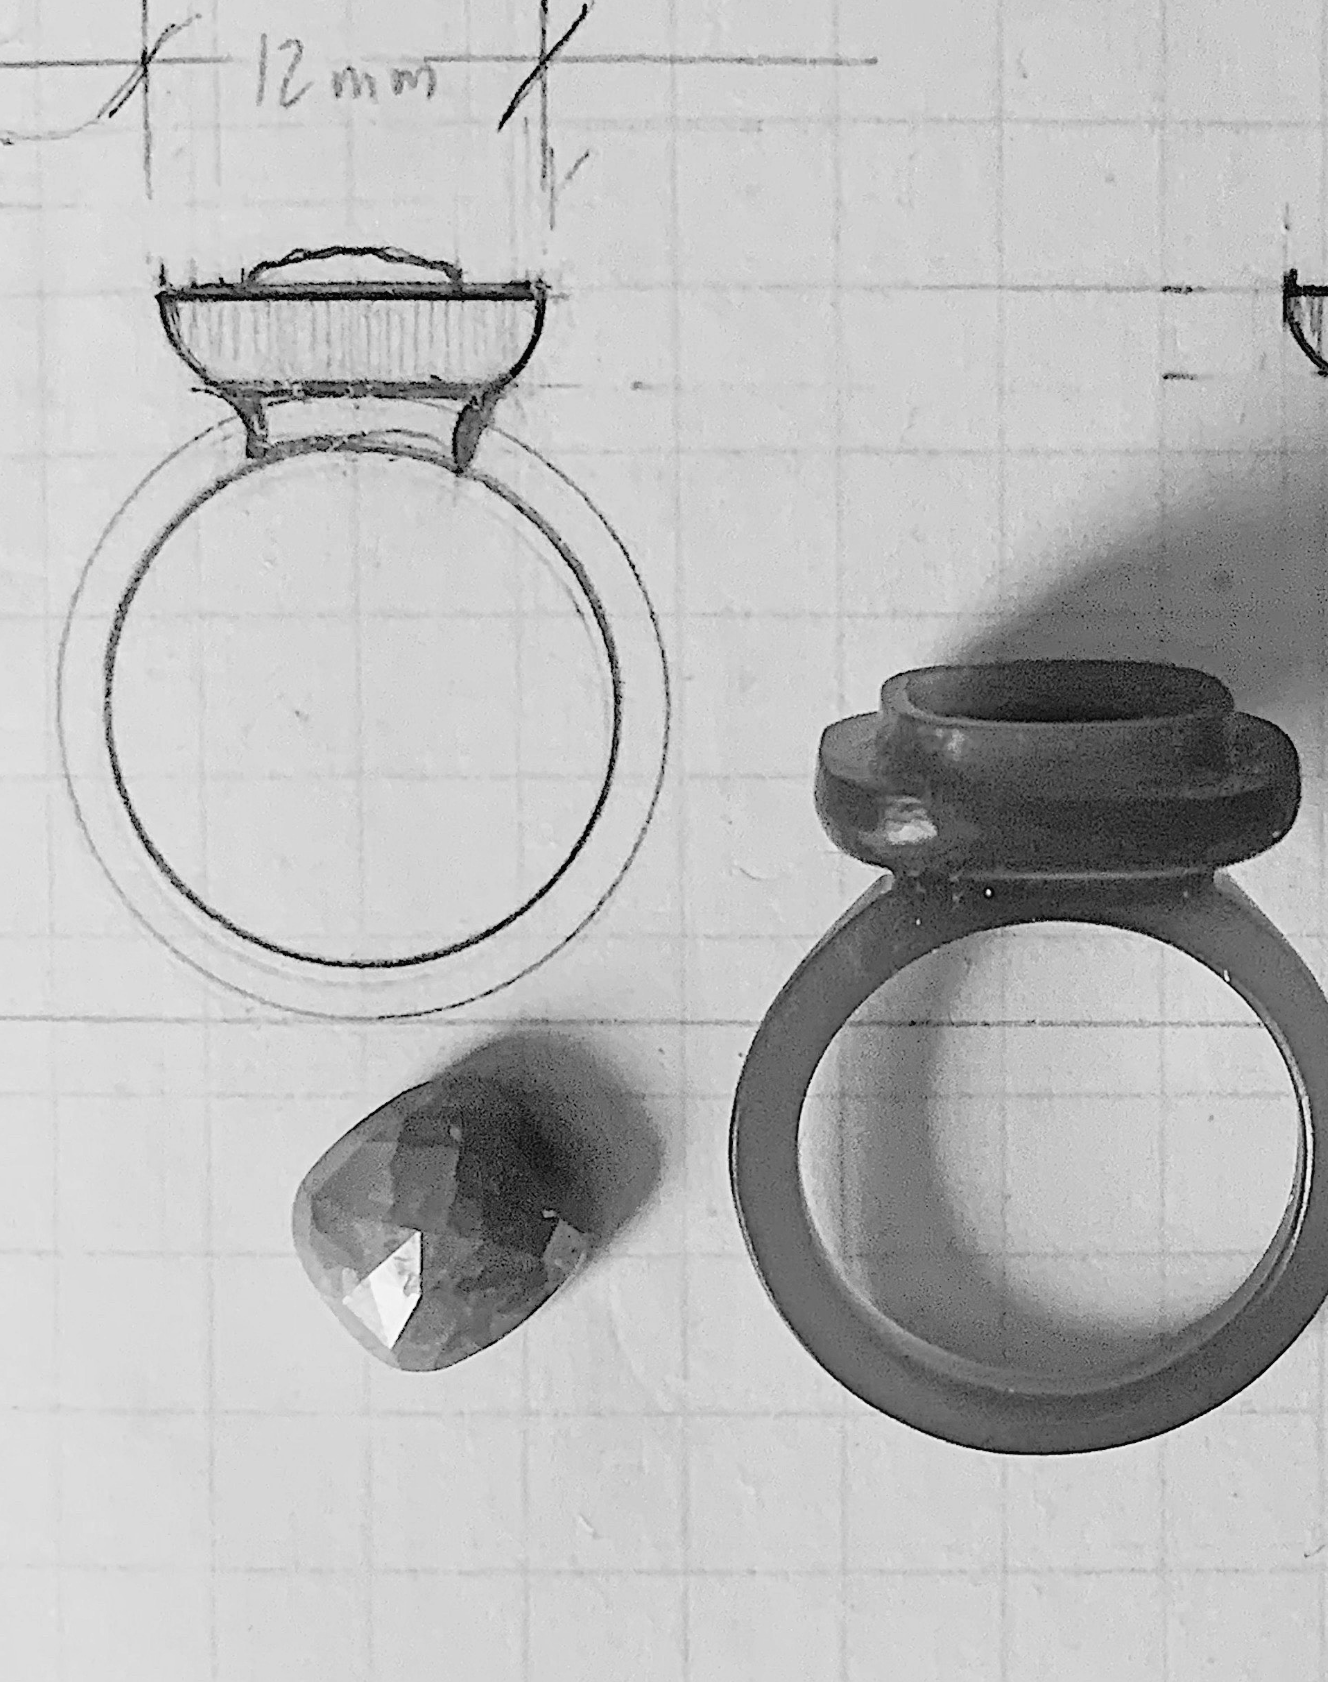 Black and white image of the i seira wax carving process to create the statement ring